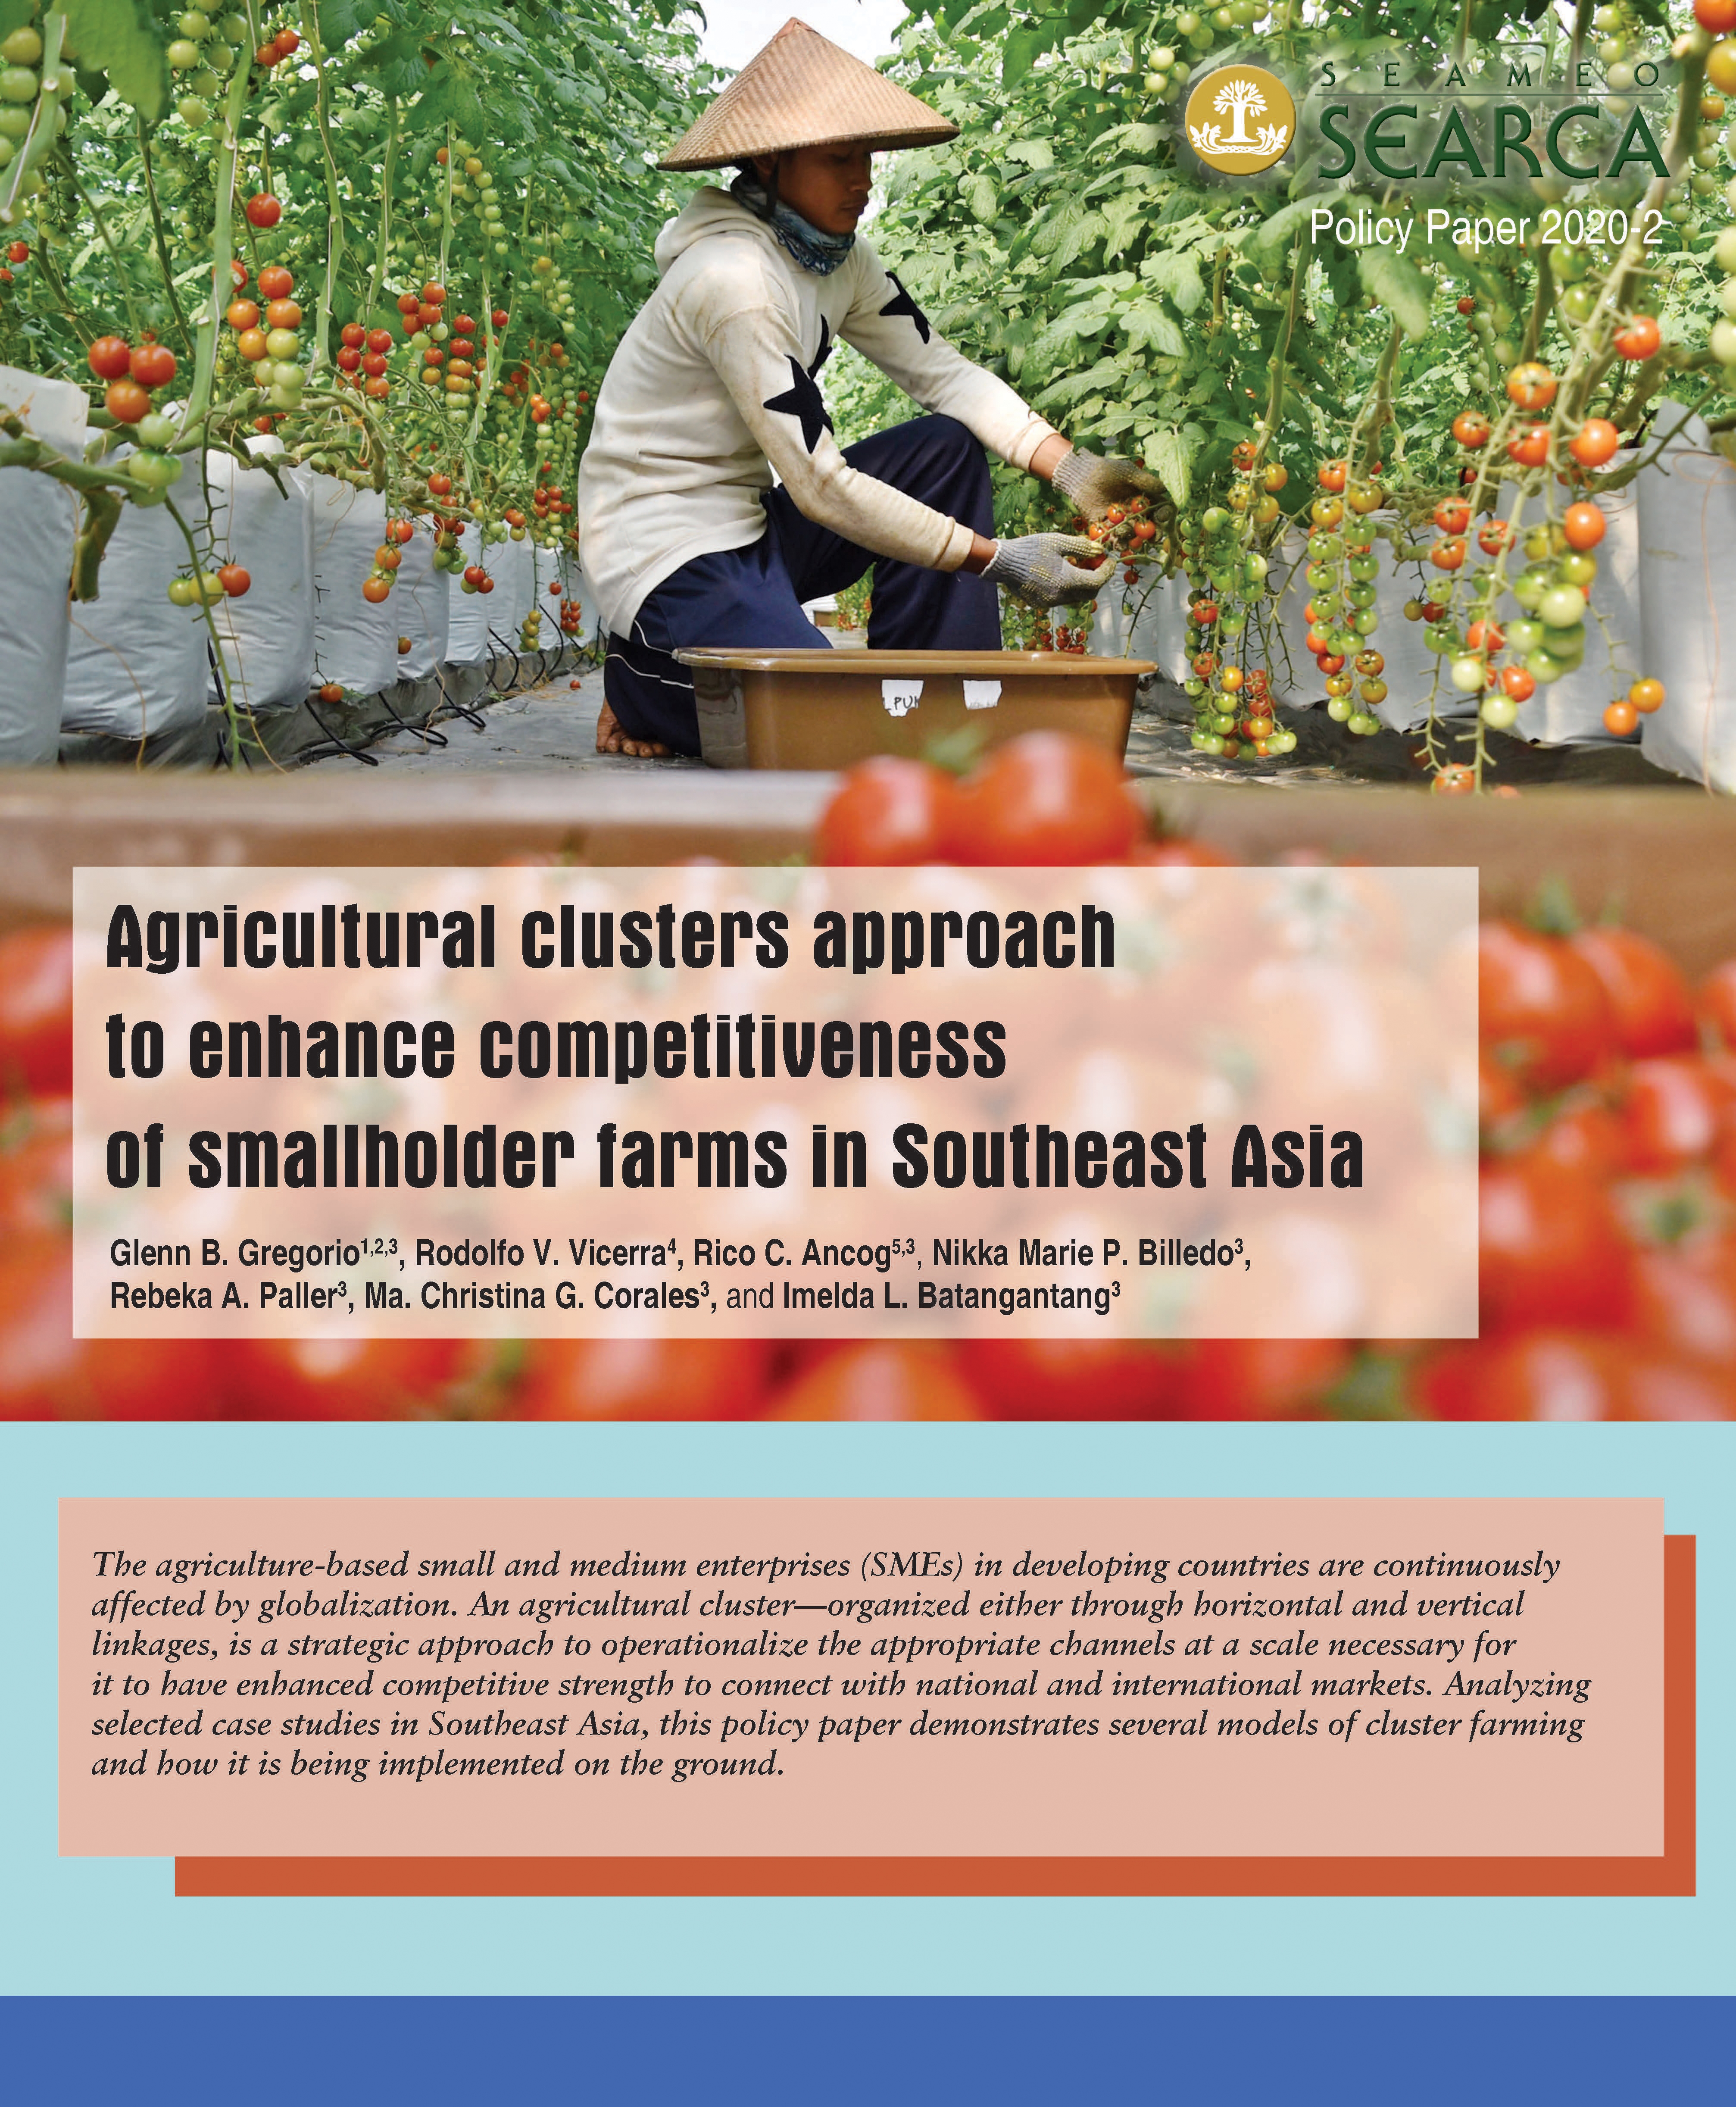 Agricultural clusters approach to enhance competitiveness of smallholder farms in Southeast Asia